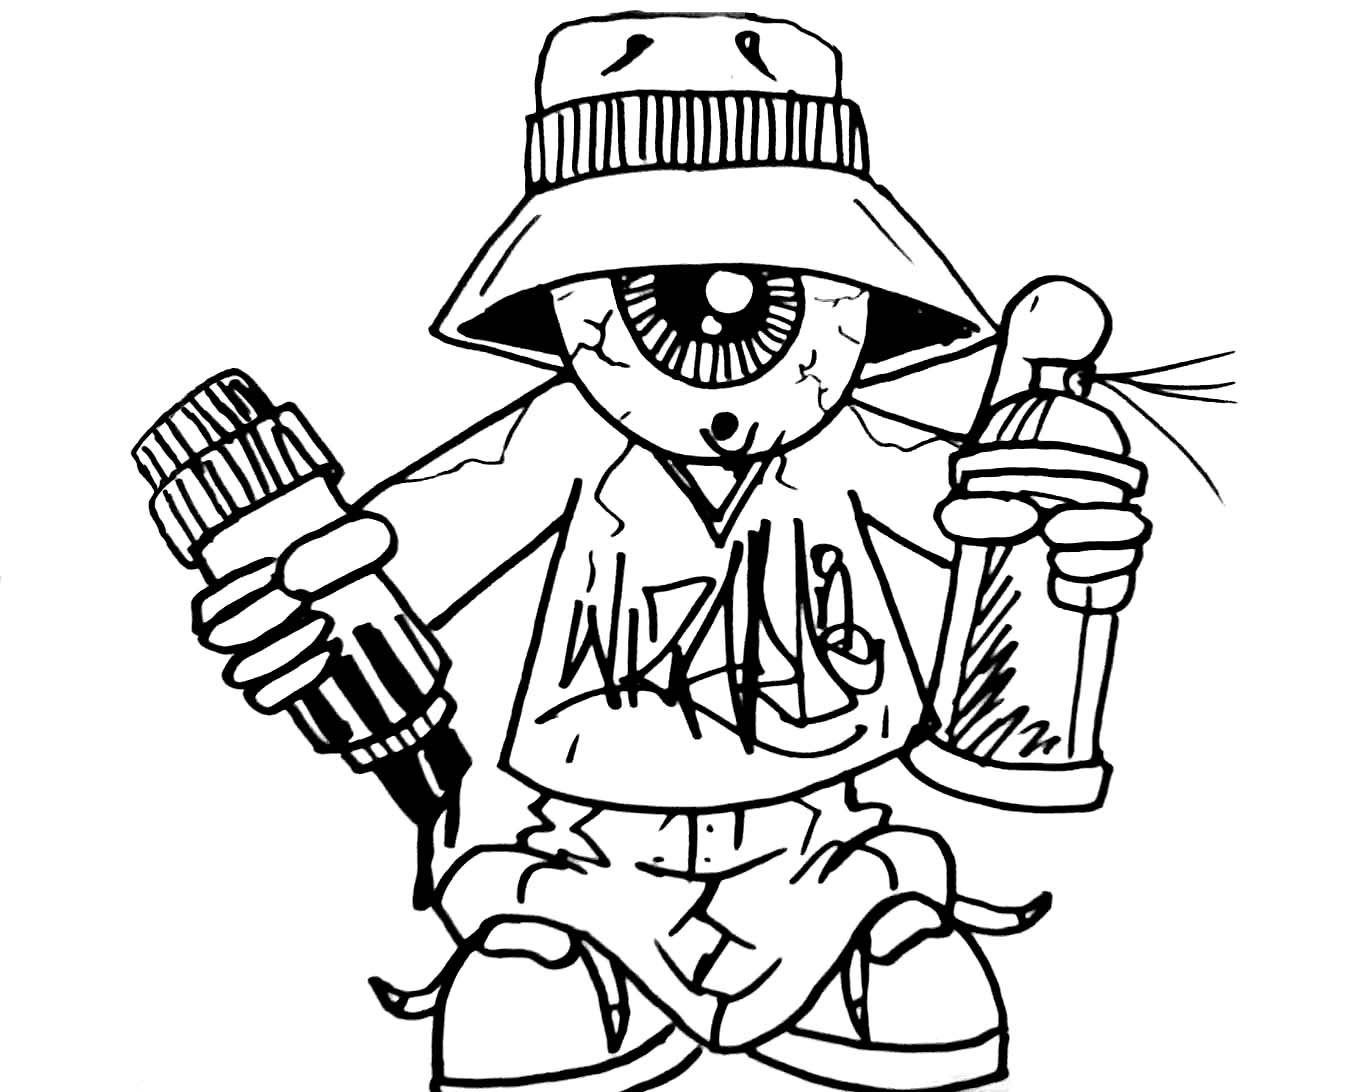 Graffiti coloring pages for teens and adults